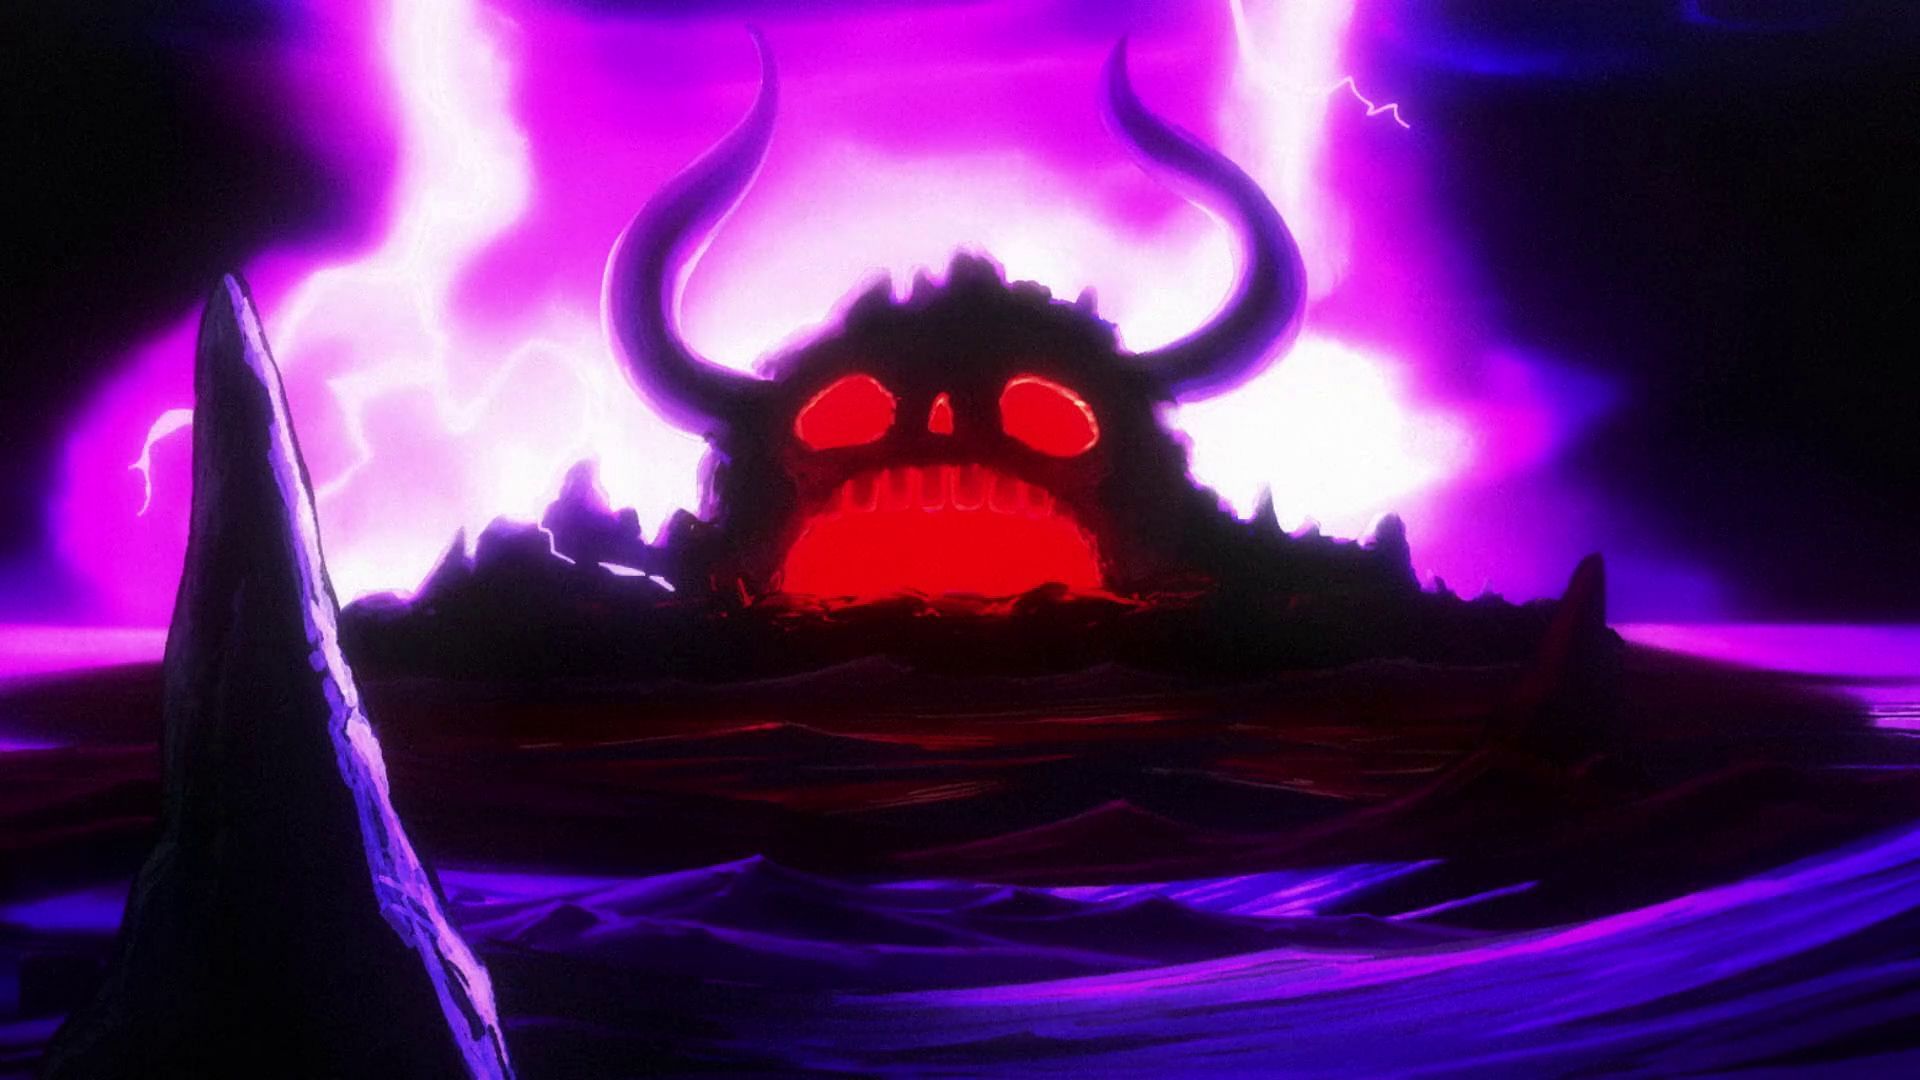 One Piece Episode 1011: Kaido's plan revealed, Zoro's proclamation, and more